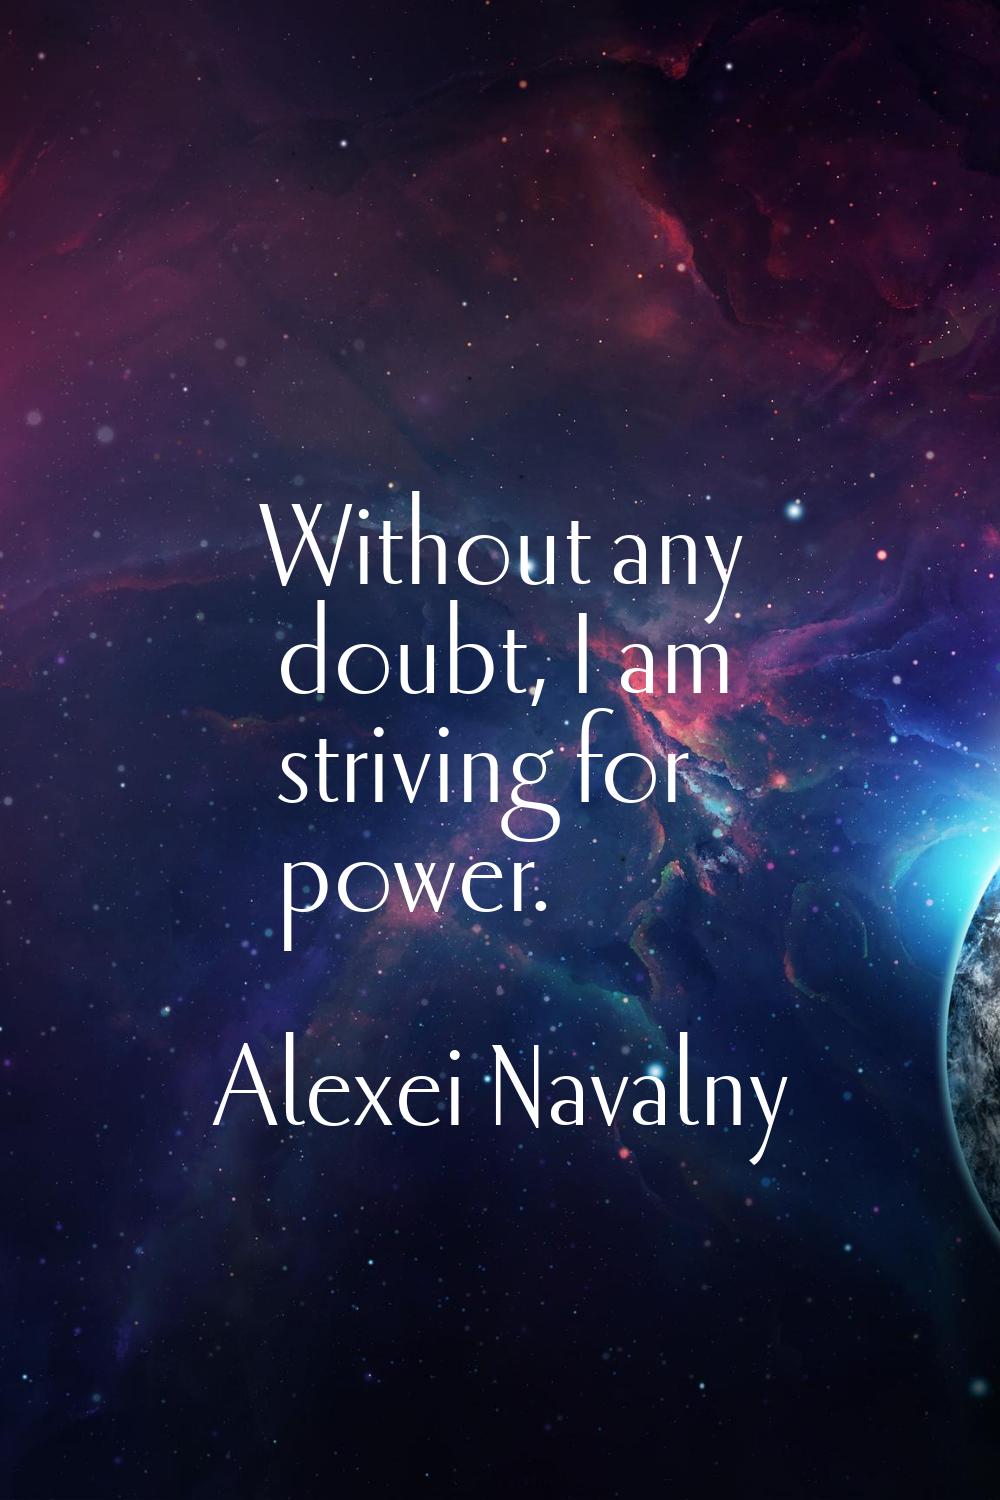 Without any doubt, I am striving for power.